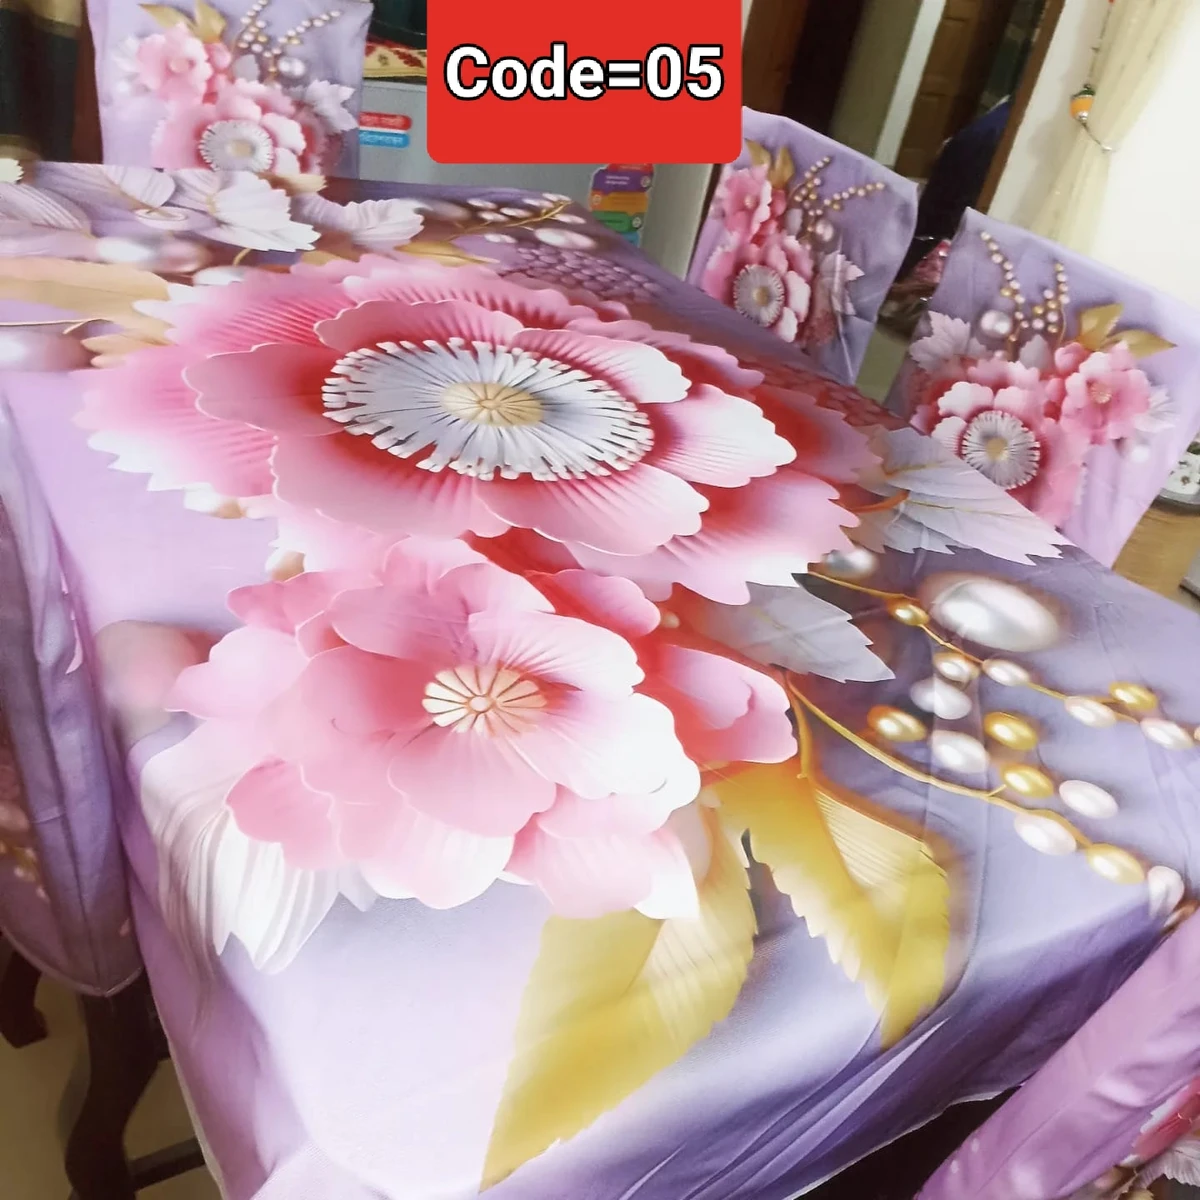 3D Pint Dining Table and Chair Cover Code=05